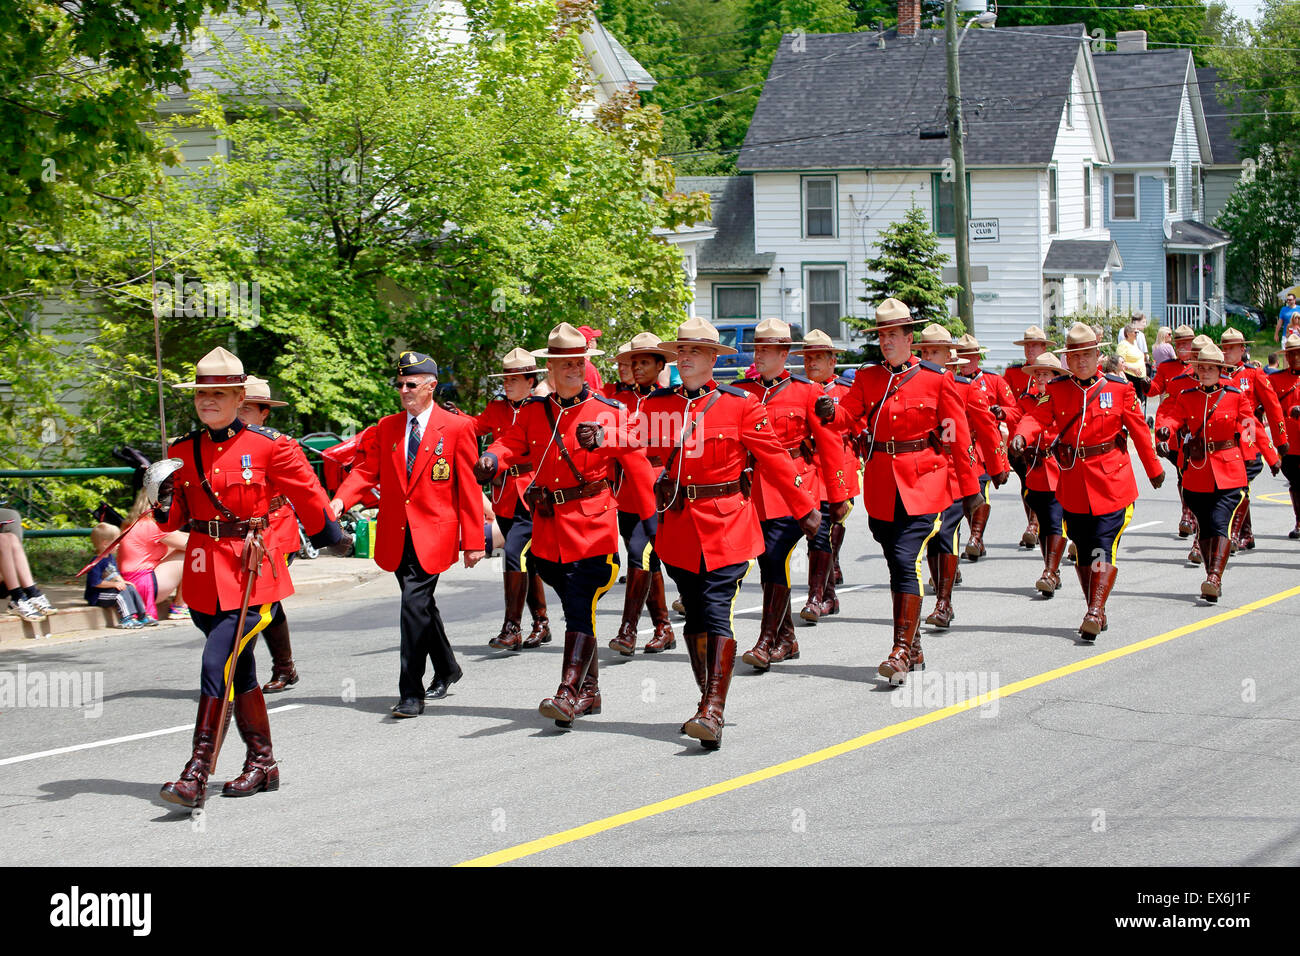 A group of Royal Canadian Mounted Police RCMP officers in red ceremonial uniform marching in a parade lead by a female officer Stock Photo